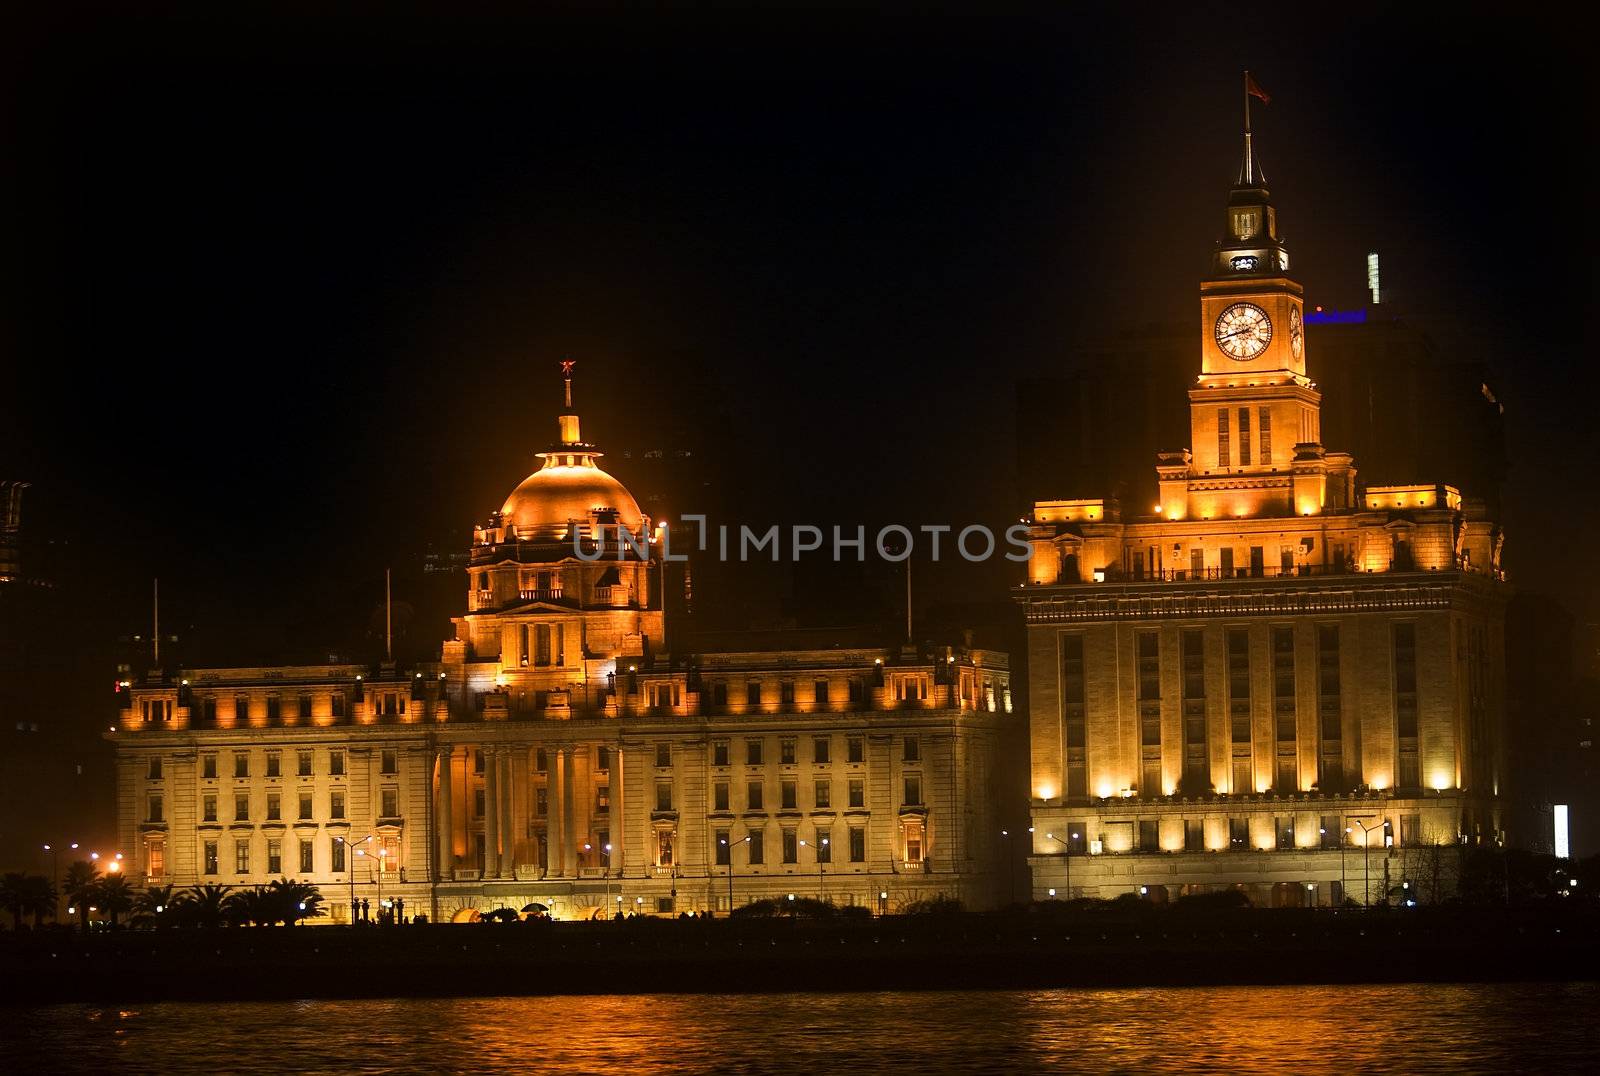 Shanghai Bund at Night Close Up by bill_perry